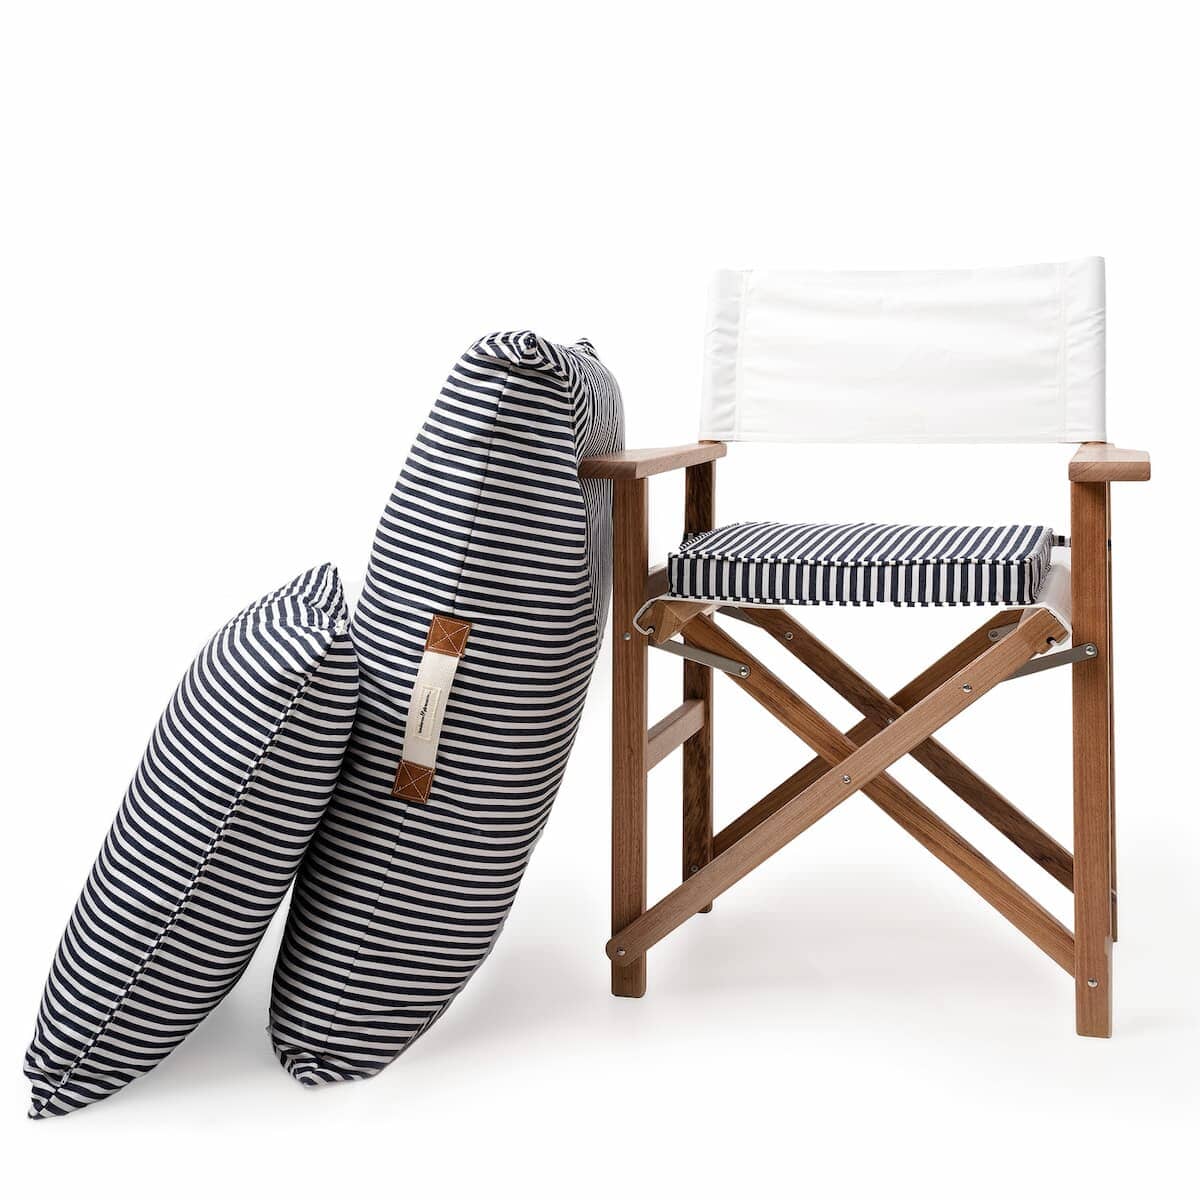 Studio image of navy stripe euro pillow leaning up against a directors chair